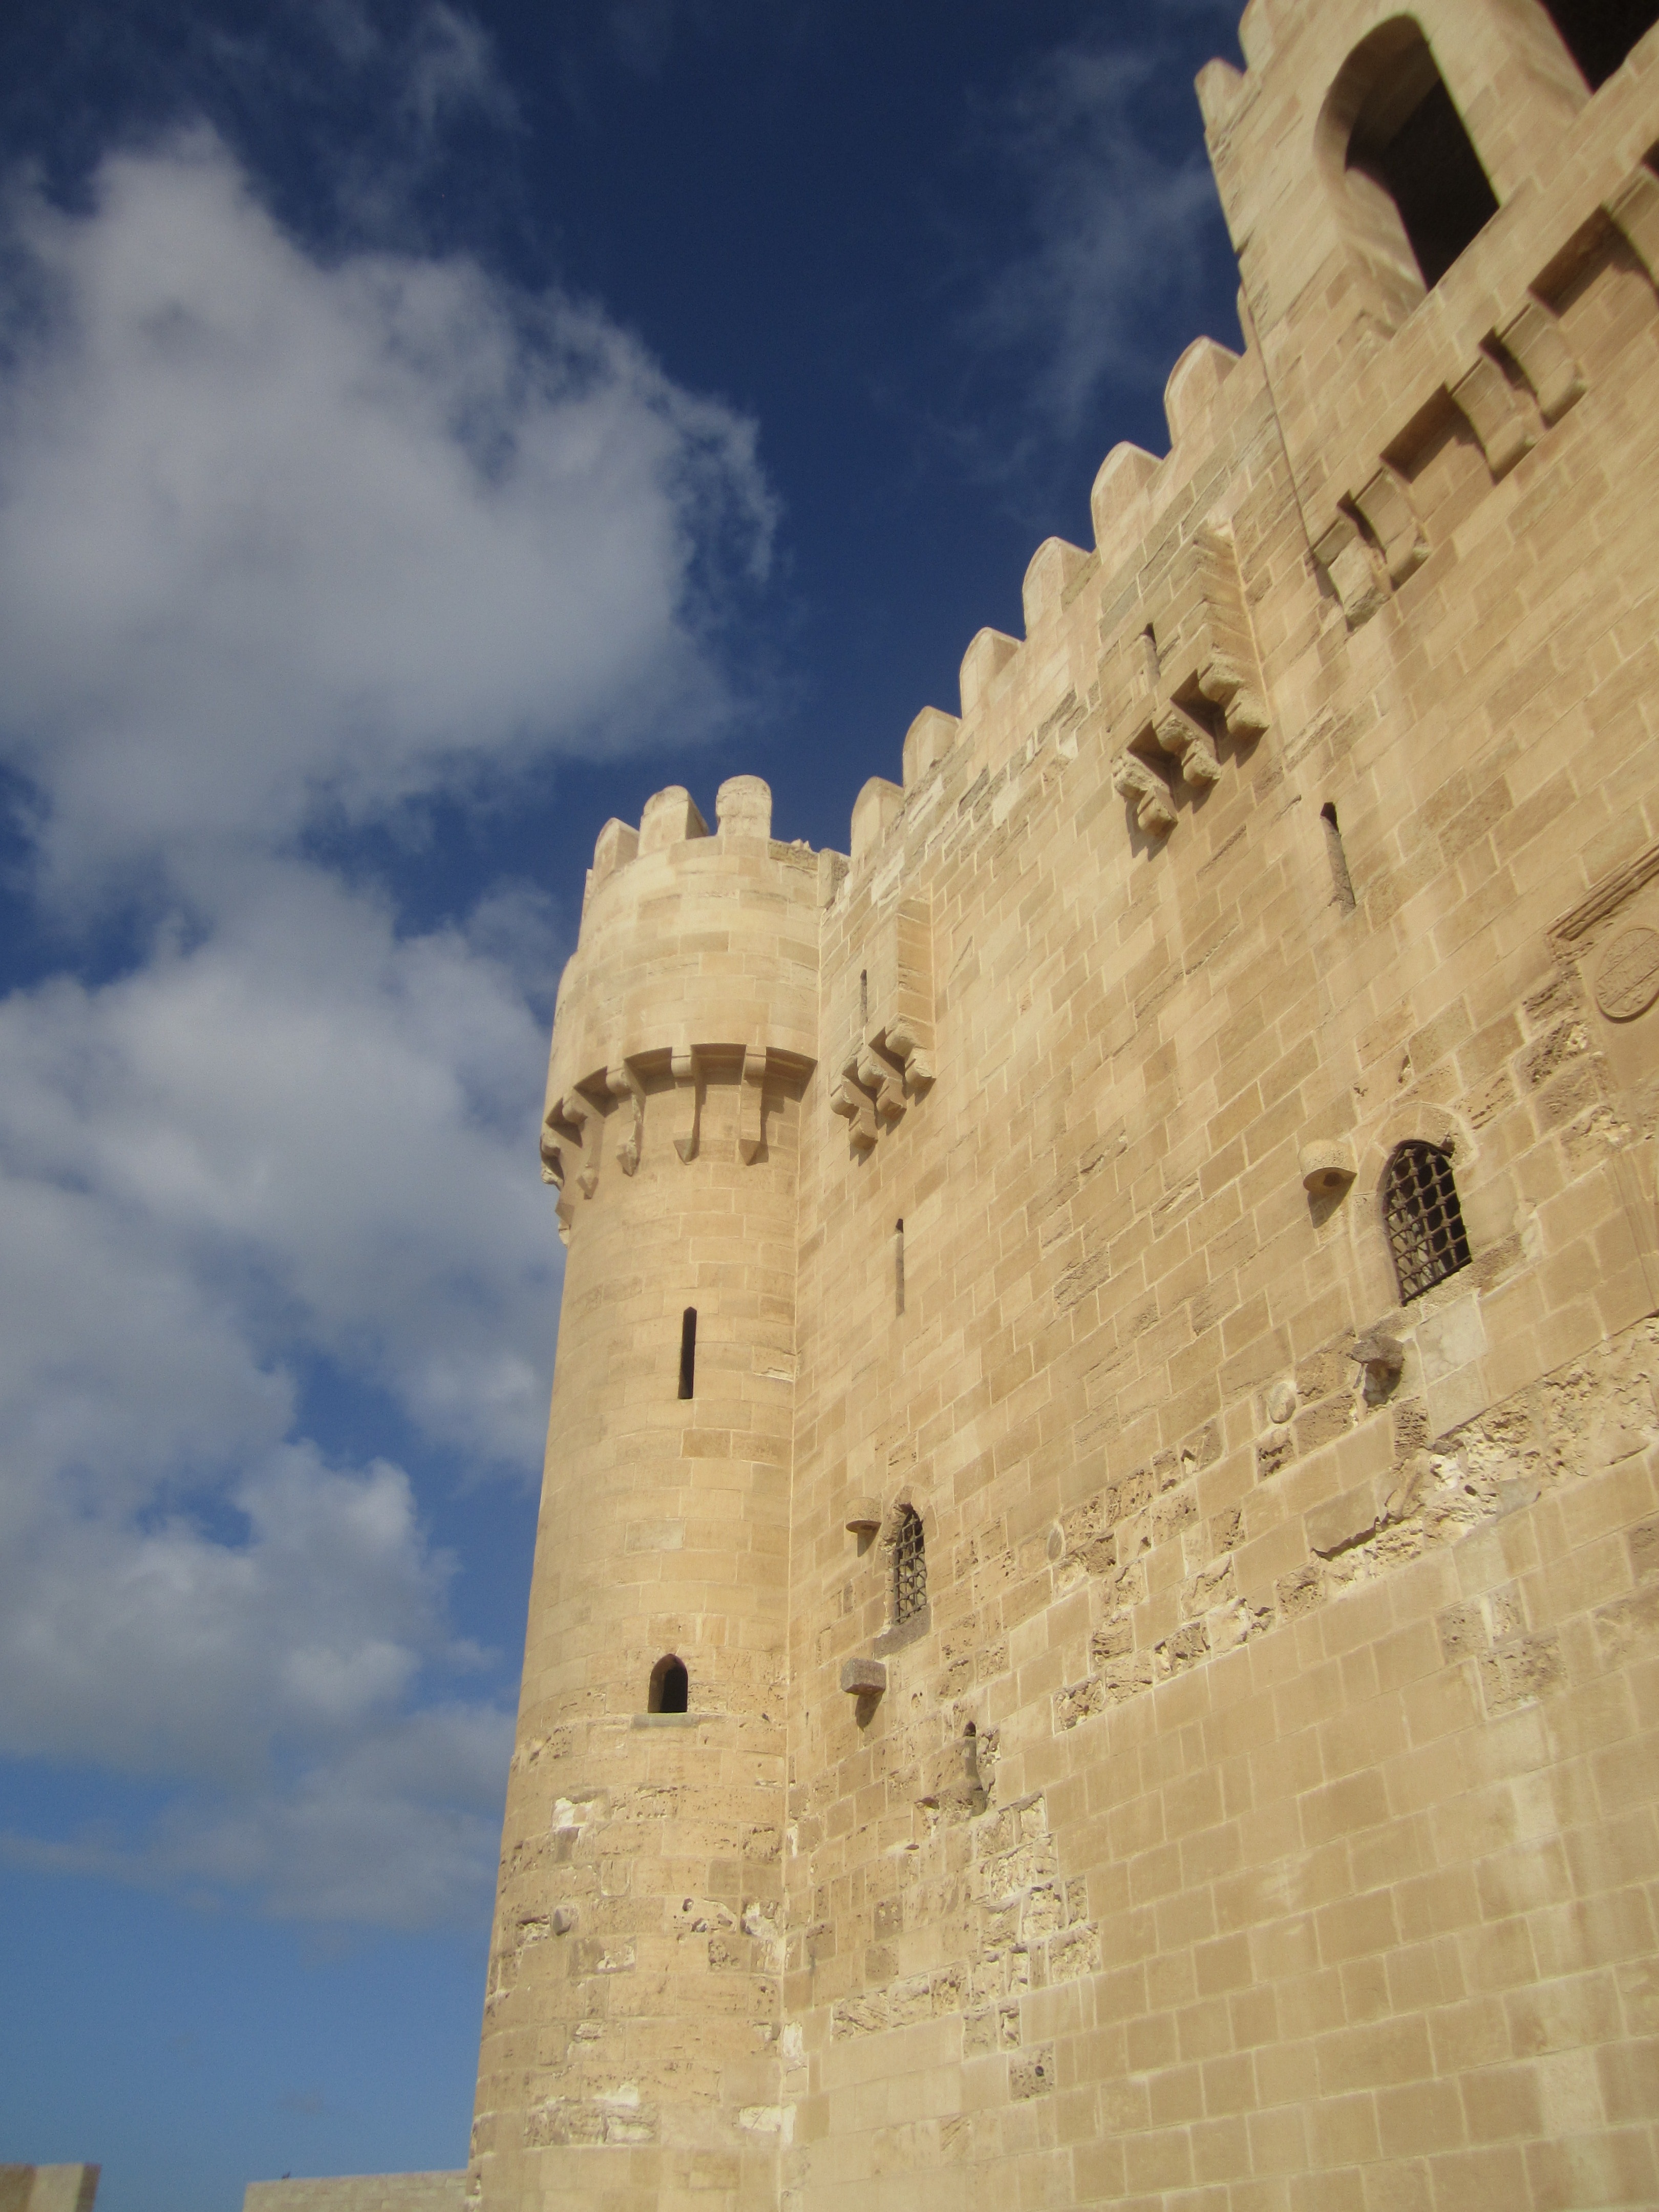 worm's eye view of castle under white and blue sky